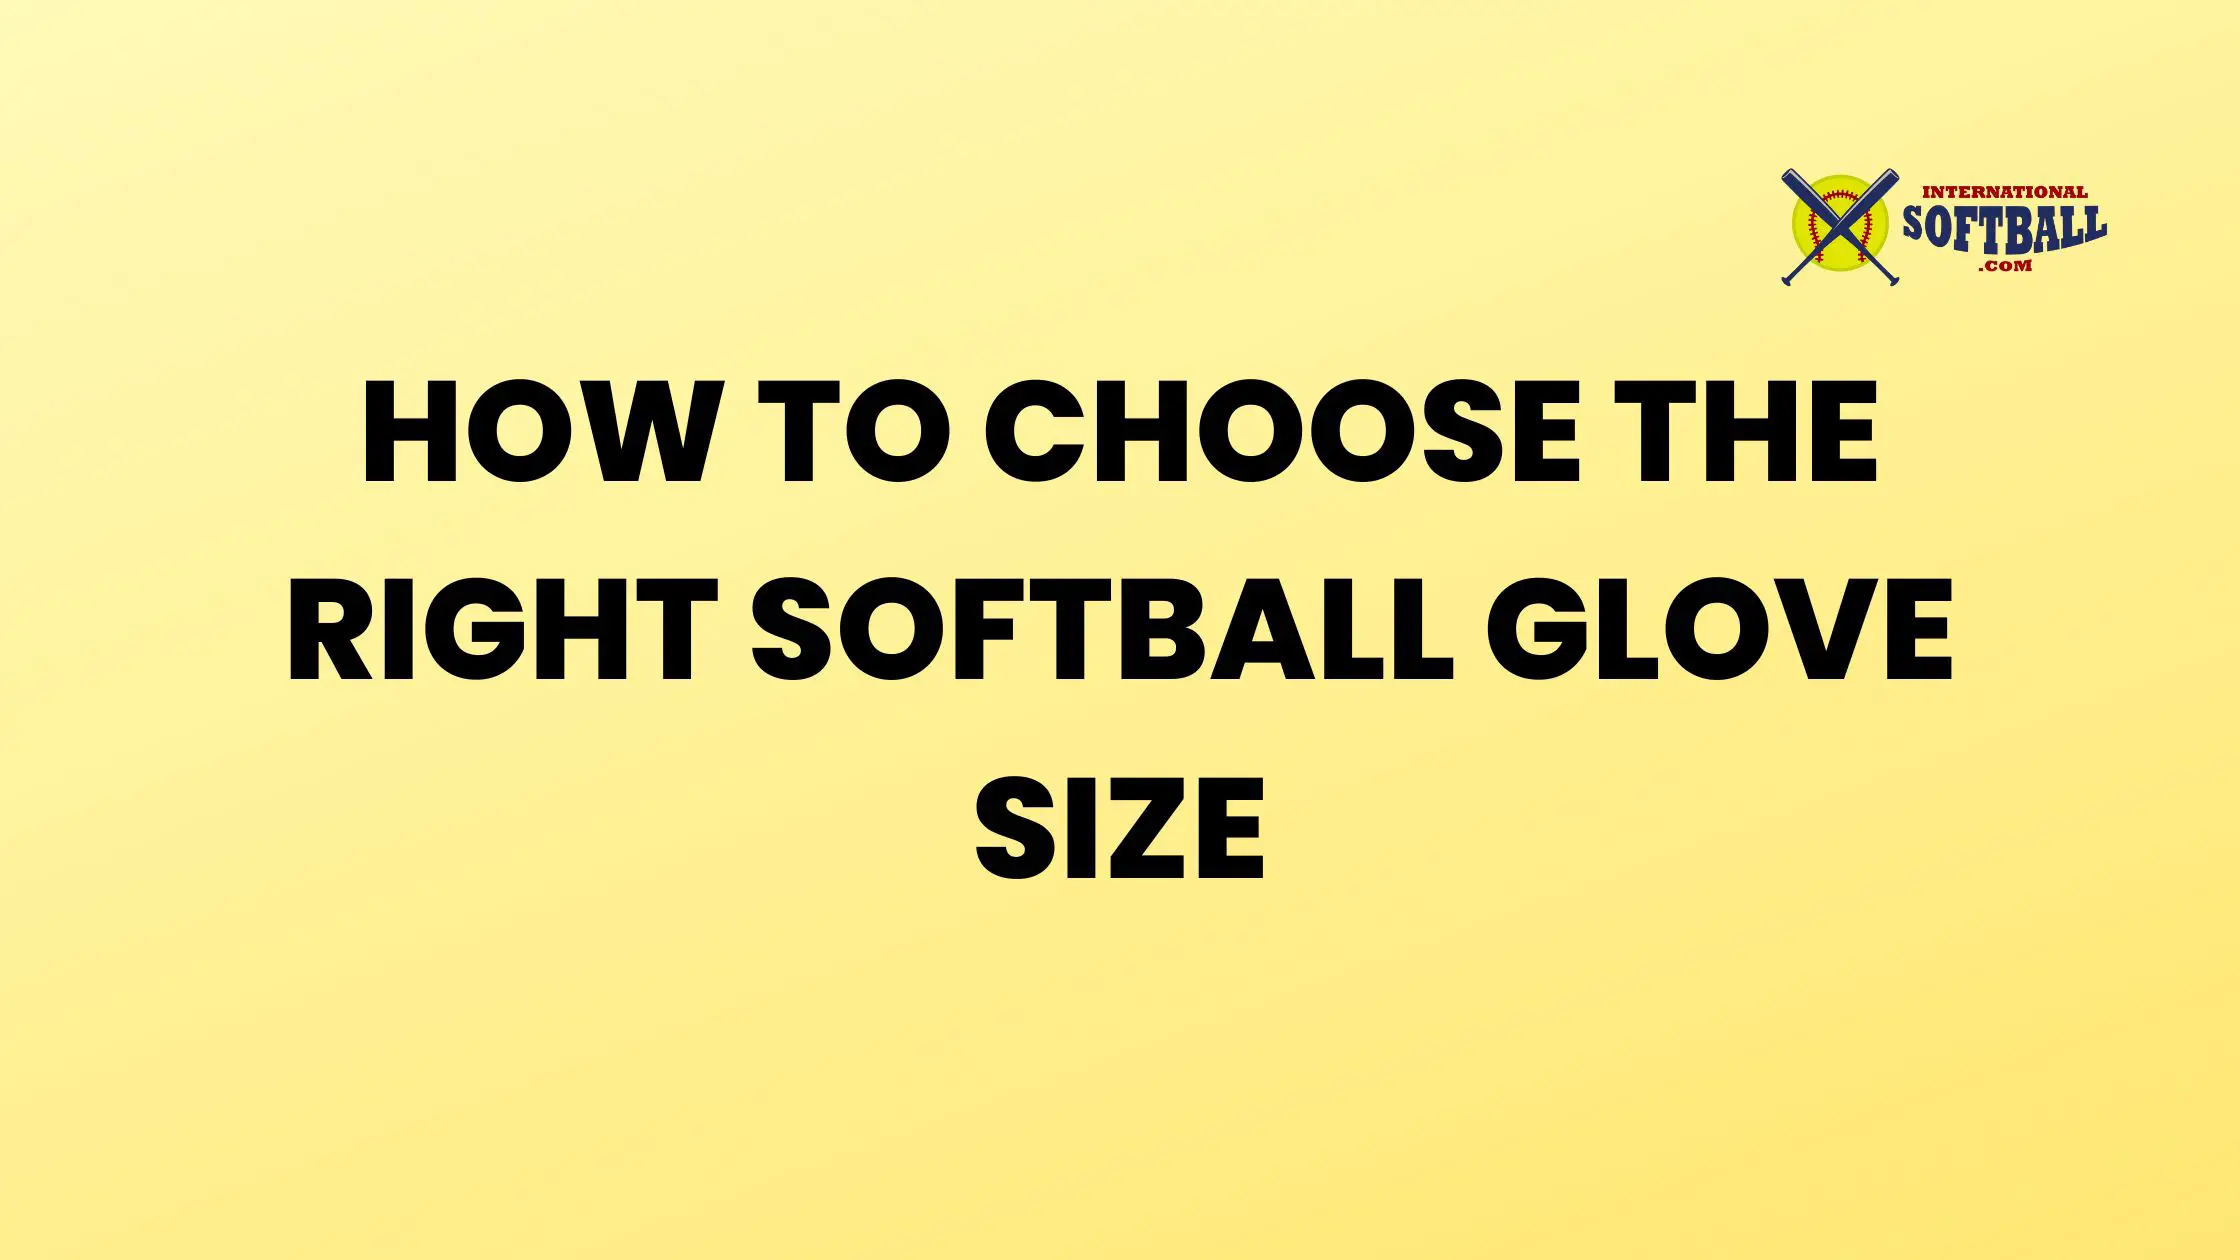 HOW TO CHOOSE THE RIGHT SOFTBALL GLOVE SIZE